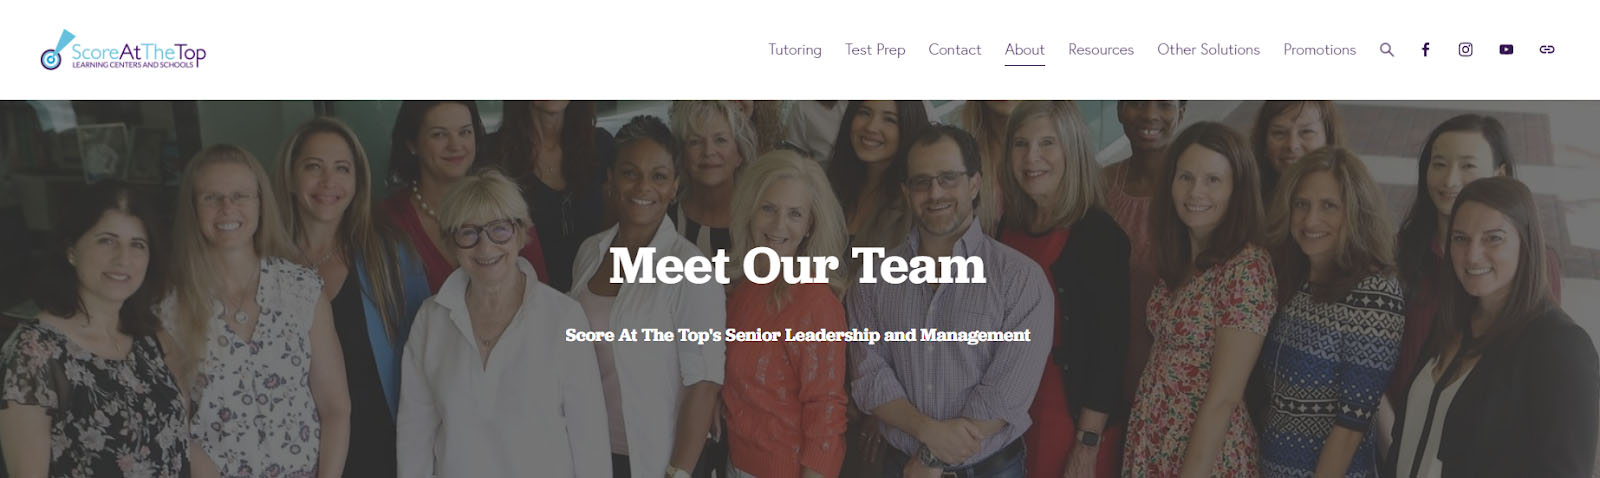 Photo of the owners and tutors at Score At The Top, taken from the website.